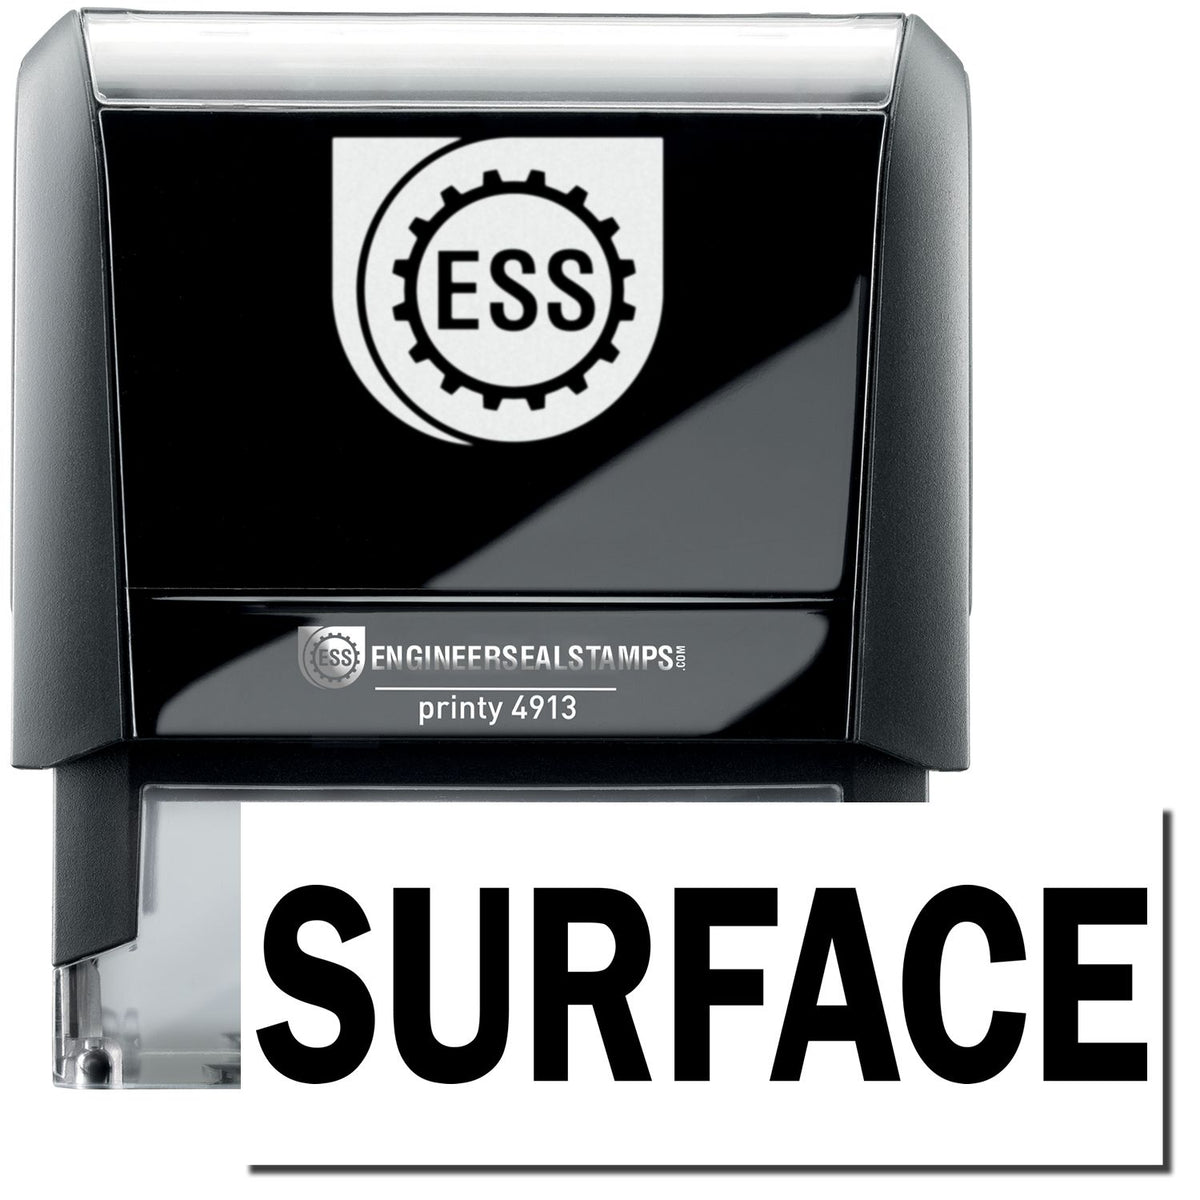 A self-inking stamp with a stamped image showing how the text &quot;SURFACE&quot; in a large font is displayed by it after stamping.